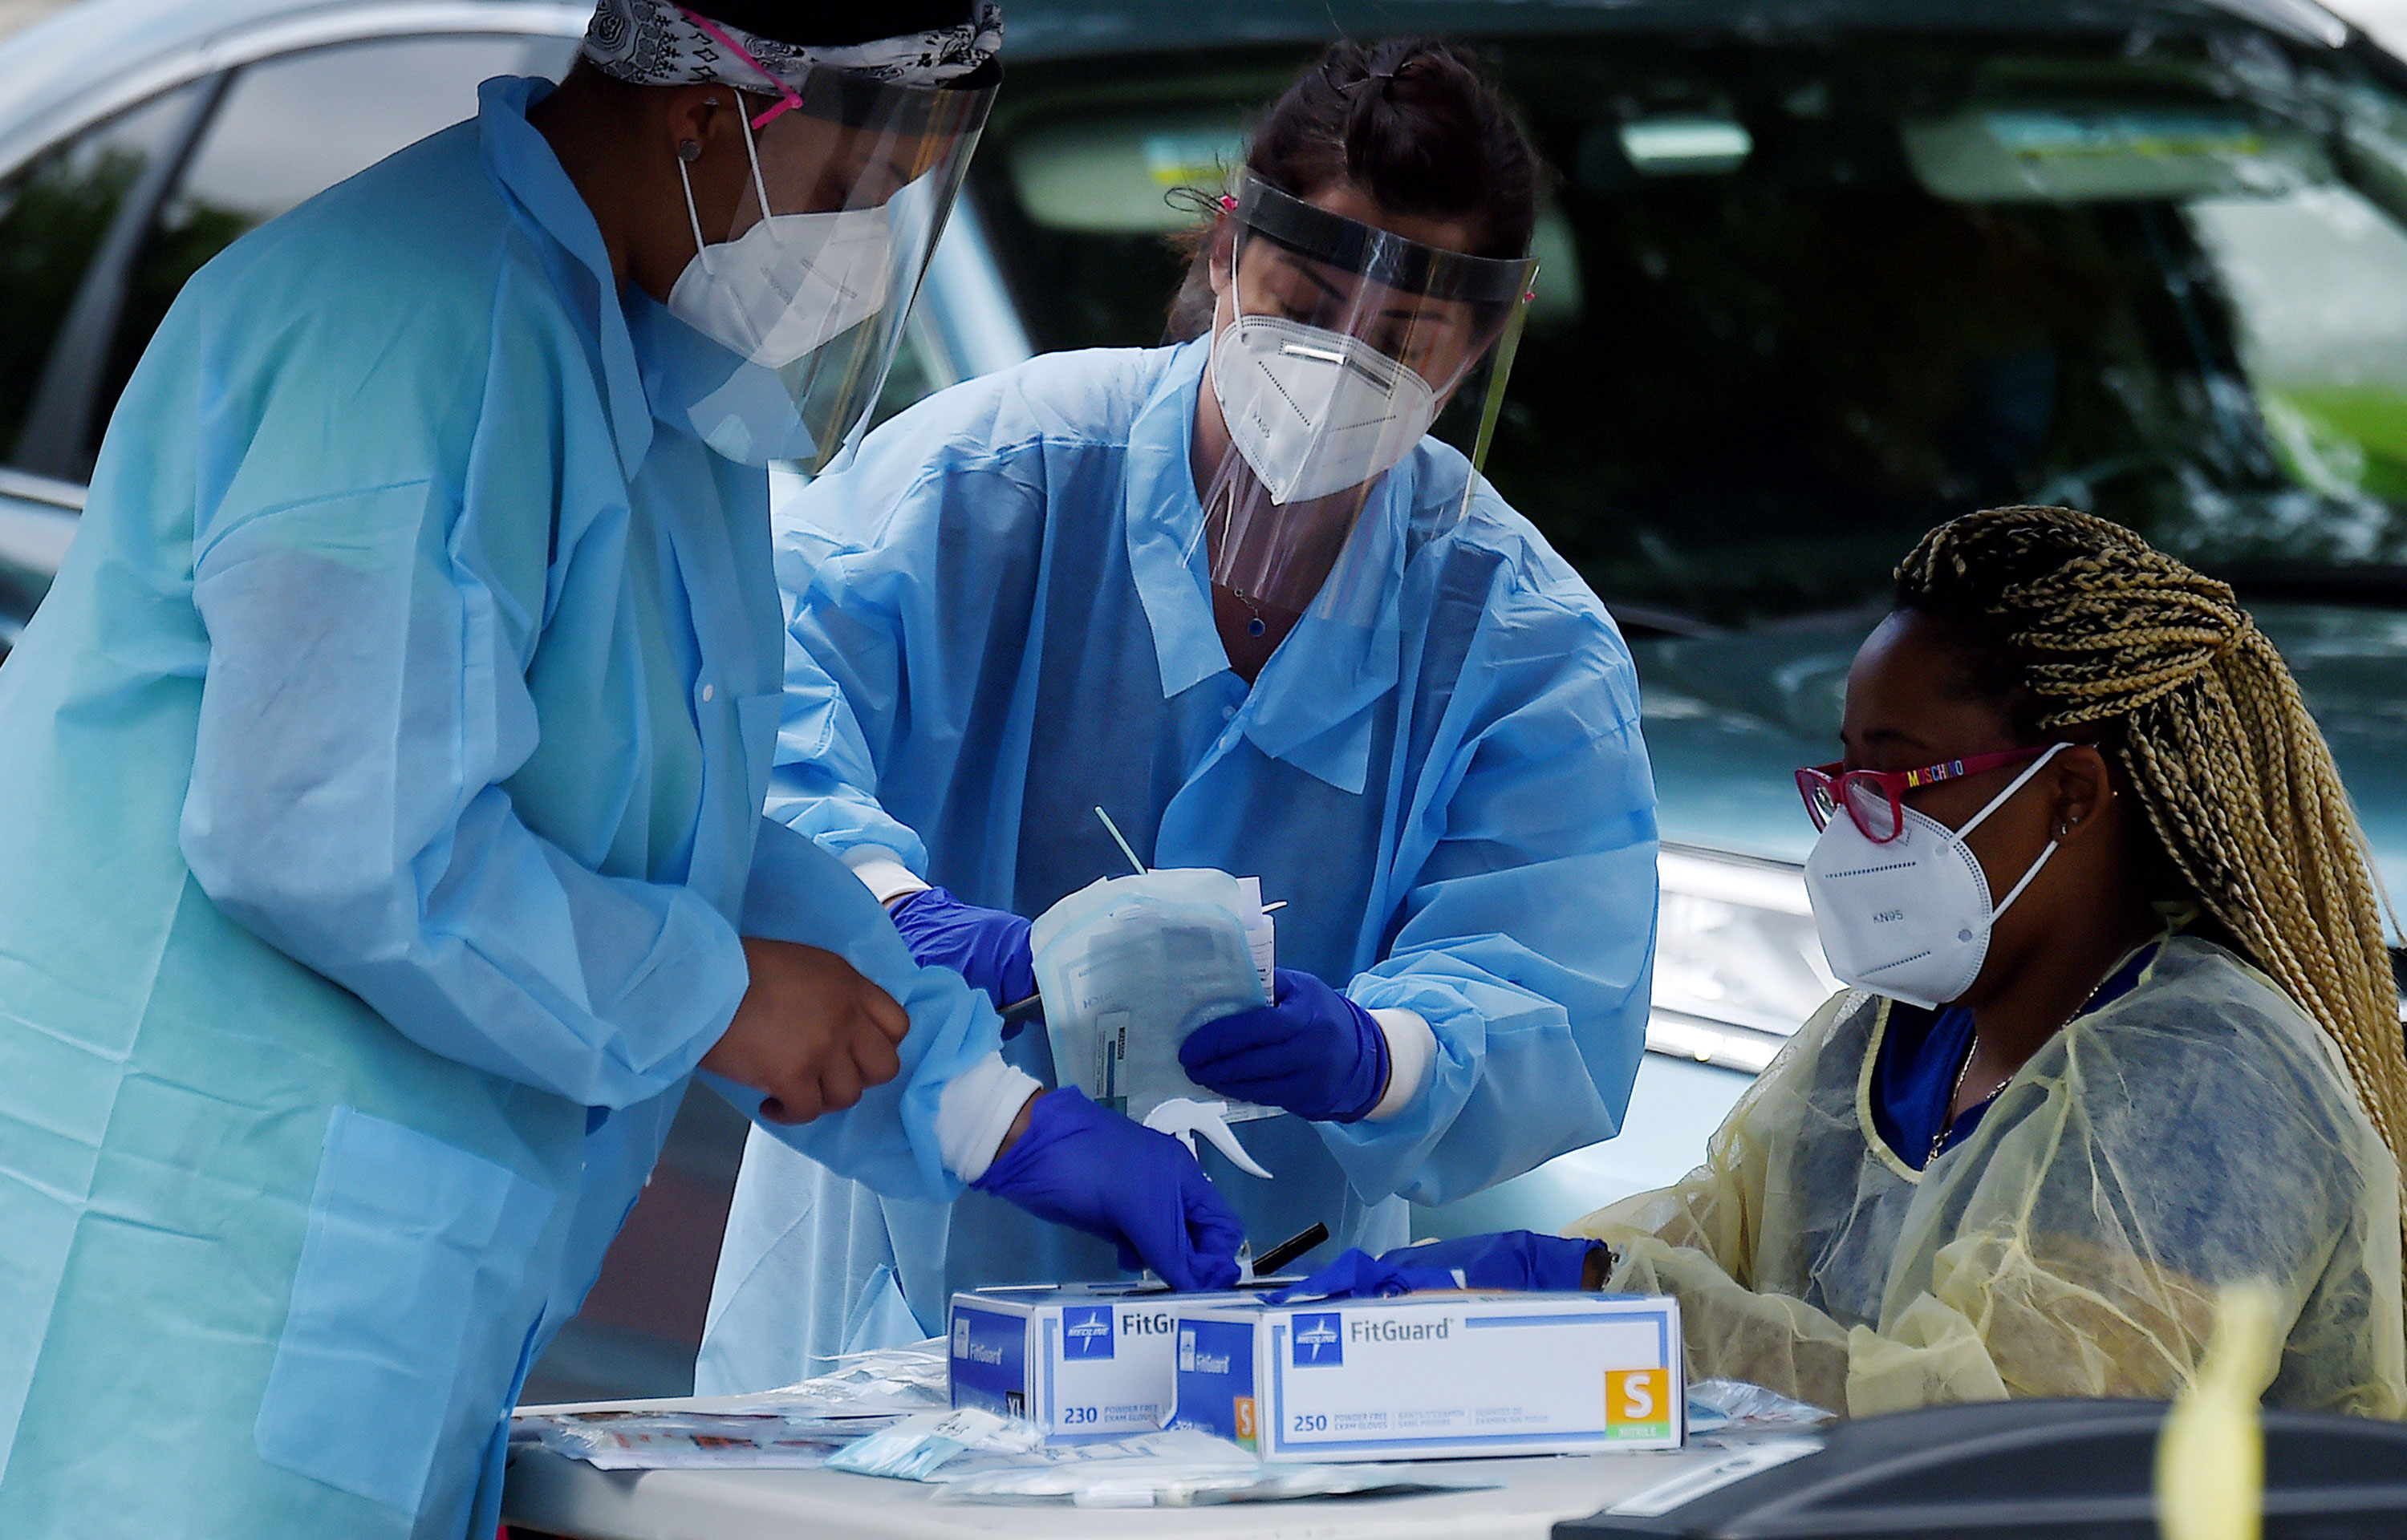 Health workers prepare to give people free coronavirus tests at a testing center in Arlington, Virginia, on May 26.